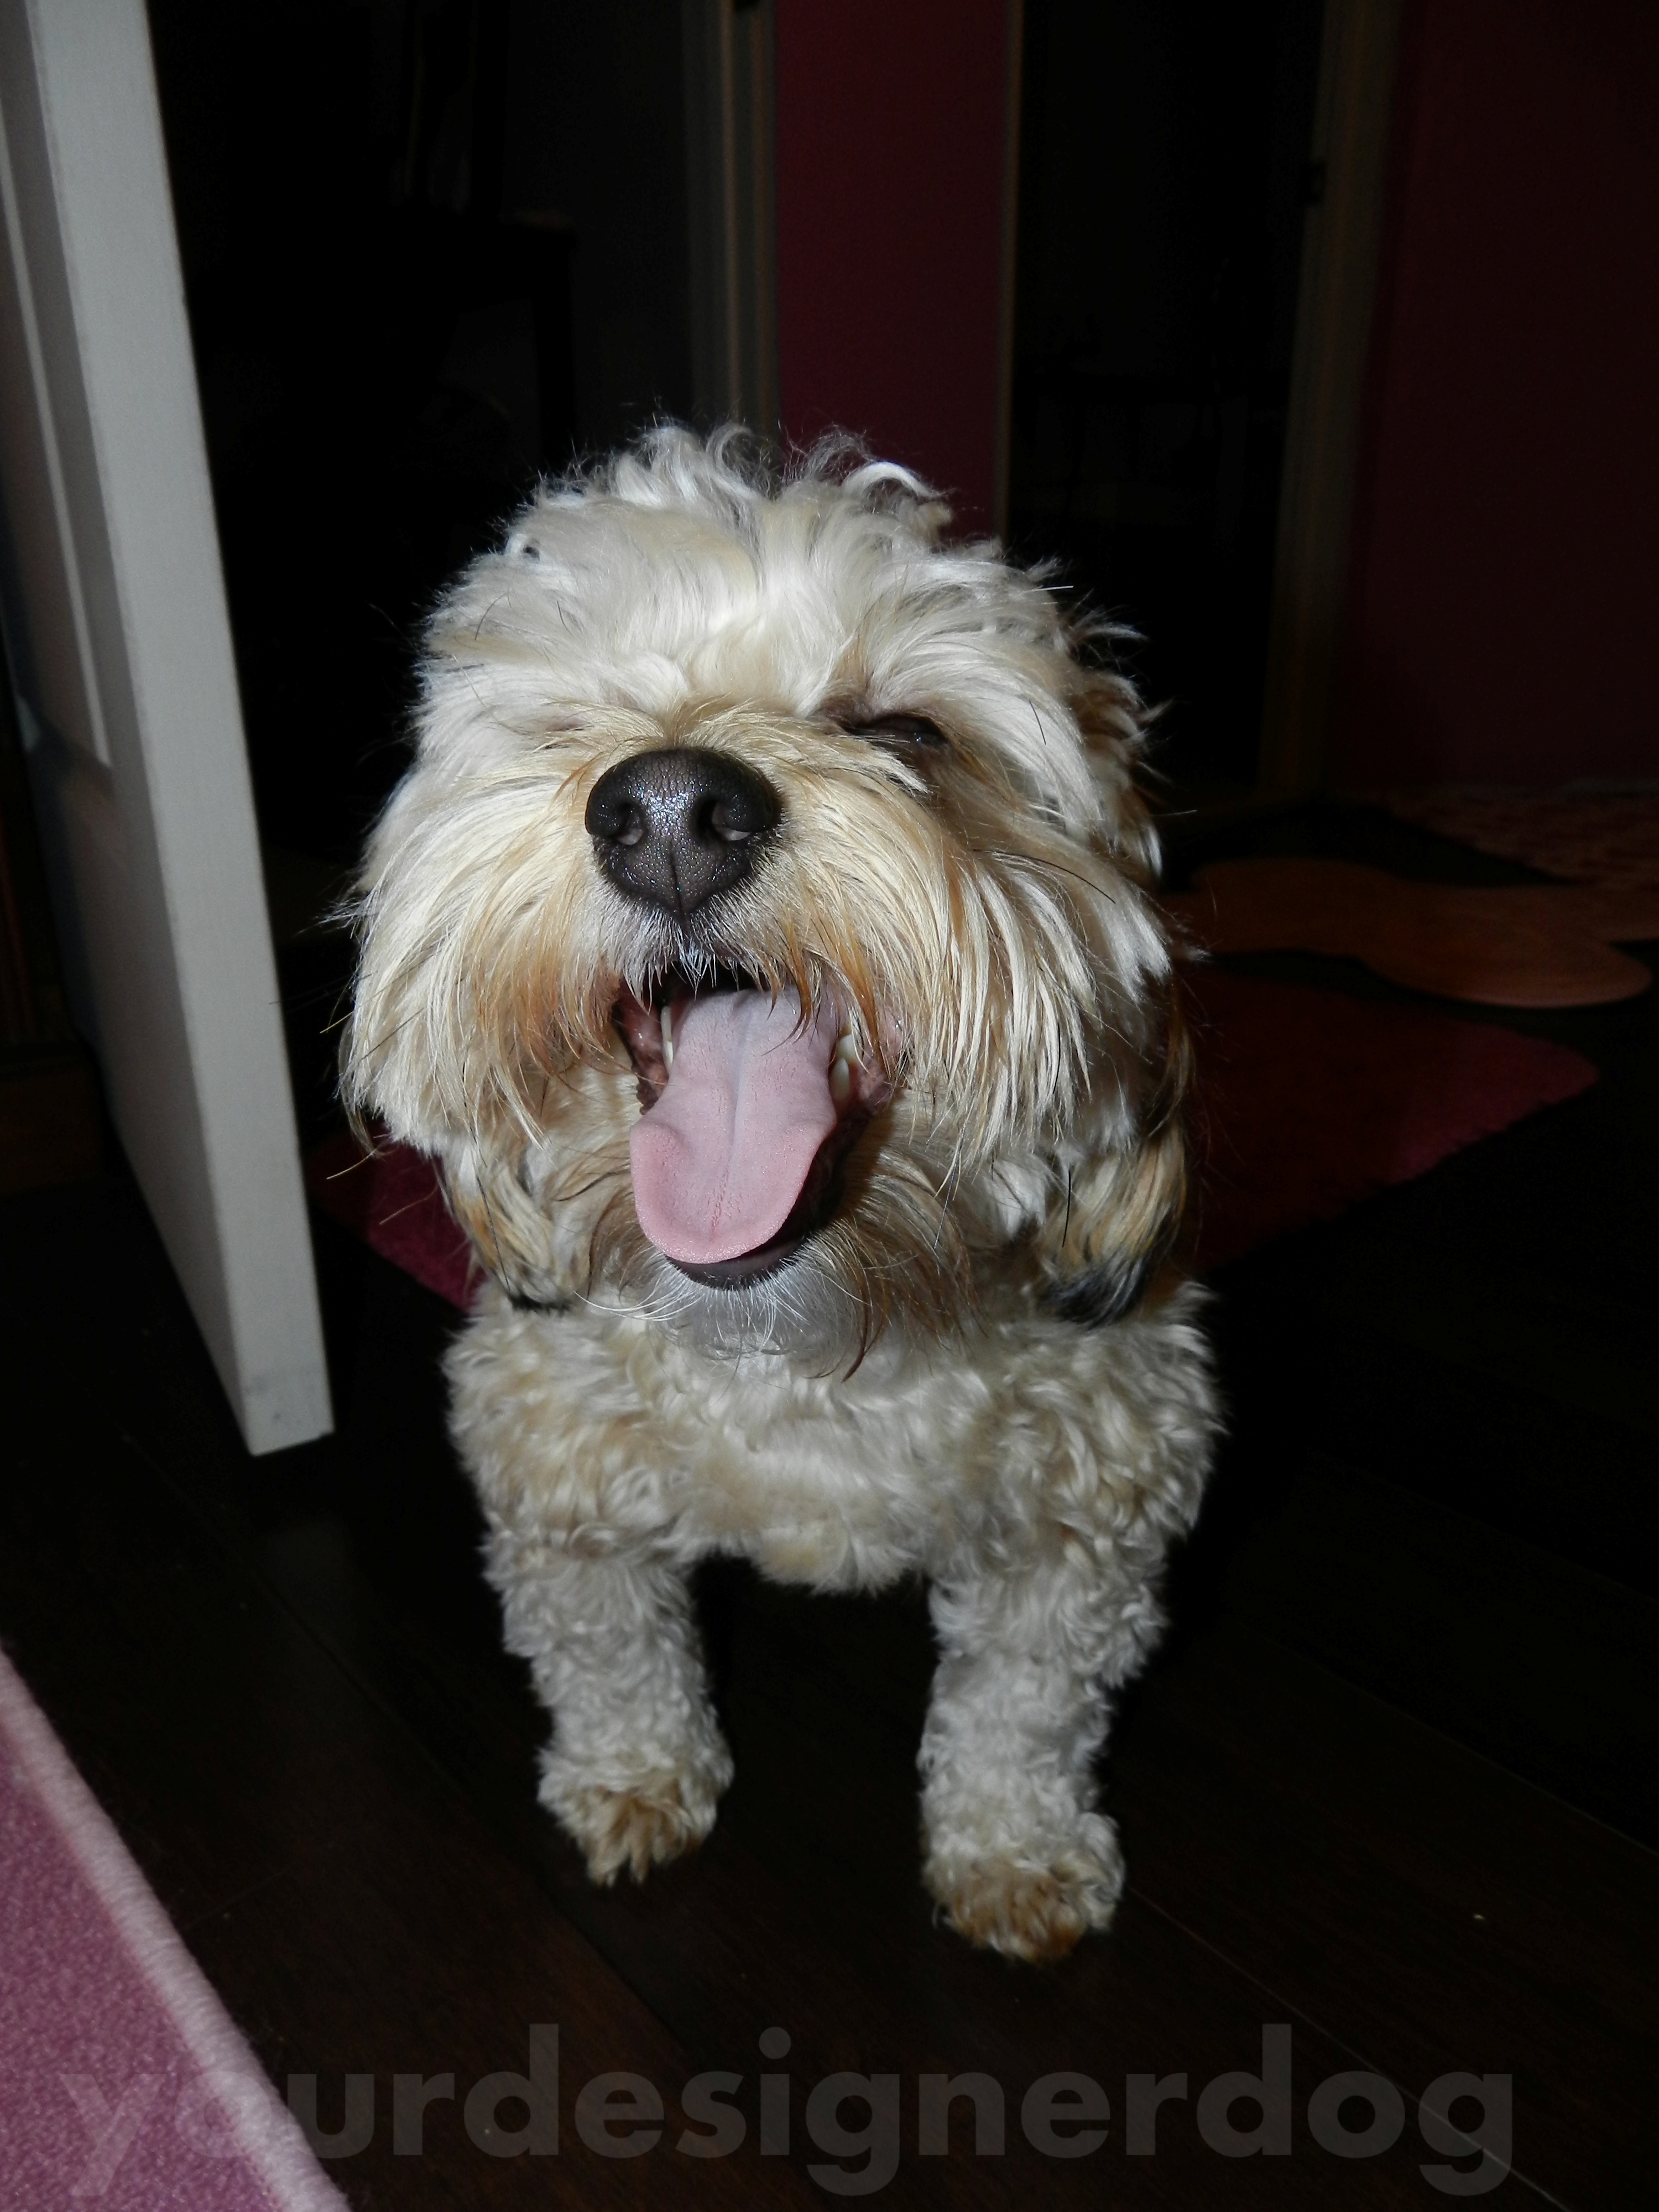 dogs, designer dogs, yorkipoo, yorkie poo, #tonguetuesday, dogs smiling, say ahhhh, #tongueout